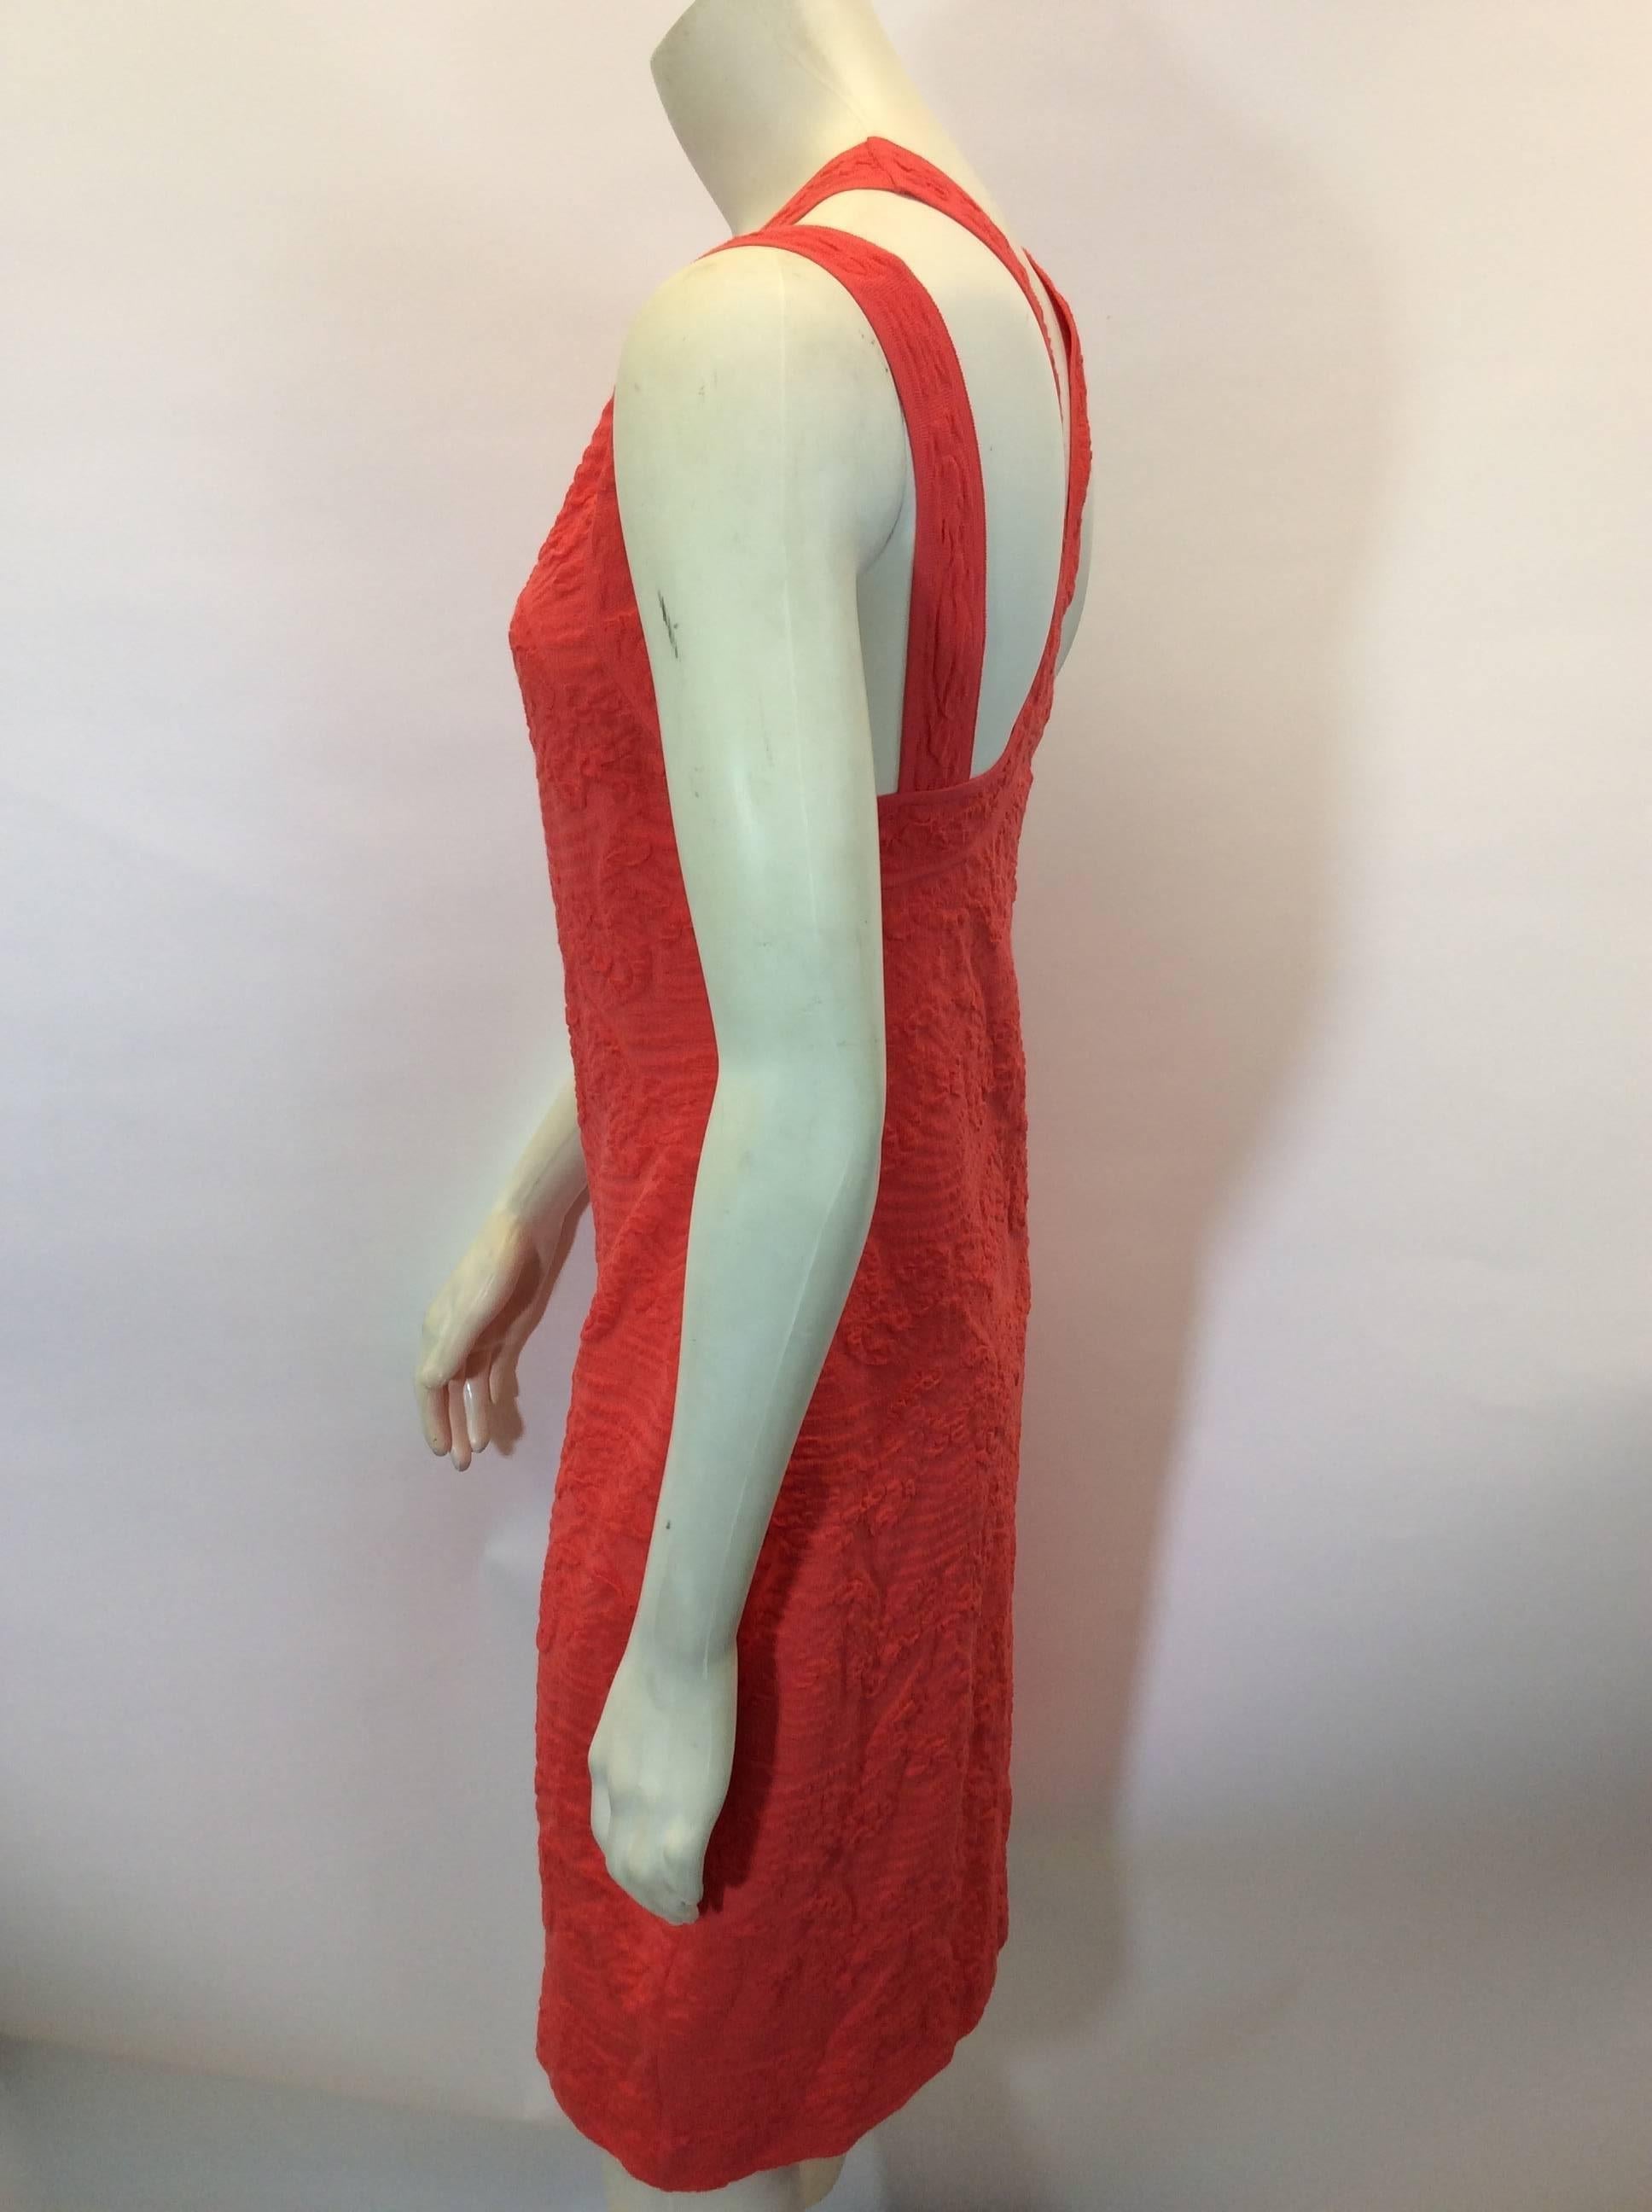 Coral Textured Stretch Dress
Double strap detail
Floral textured stretch fabric
Size 44
48% Viscose, 34% Cotton, 8% Polyamide